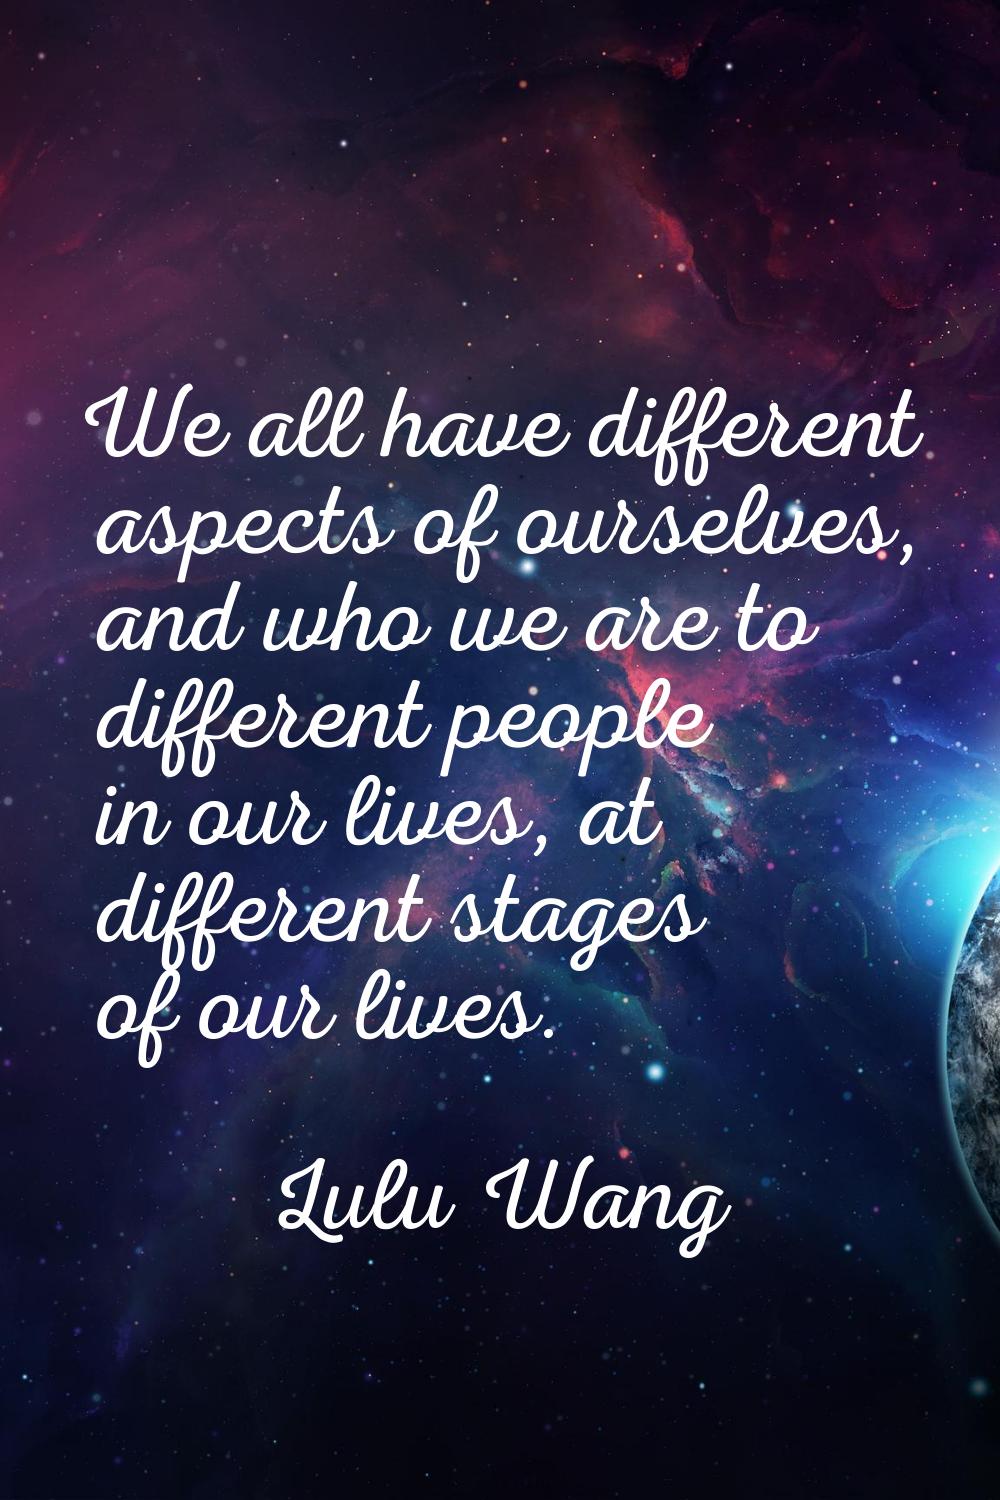 We all have different aspects of ourselves, and who we are to different people in our lives, at dif